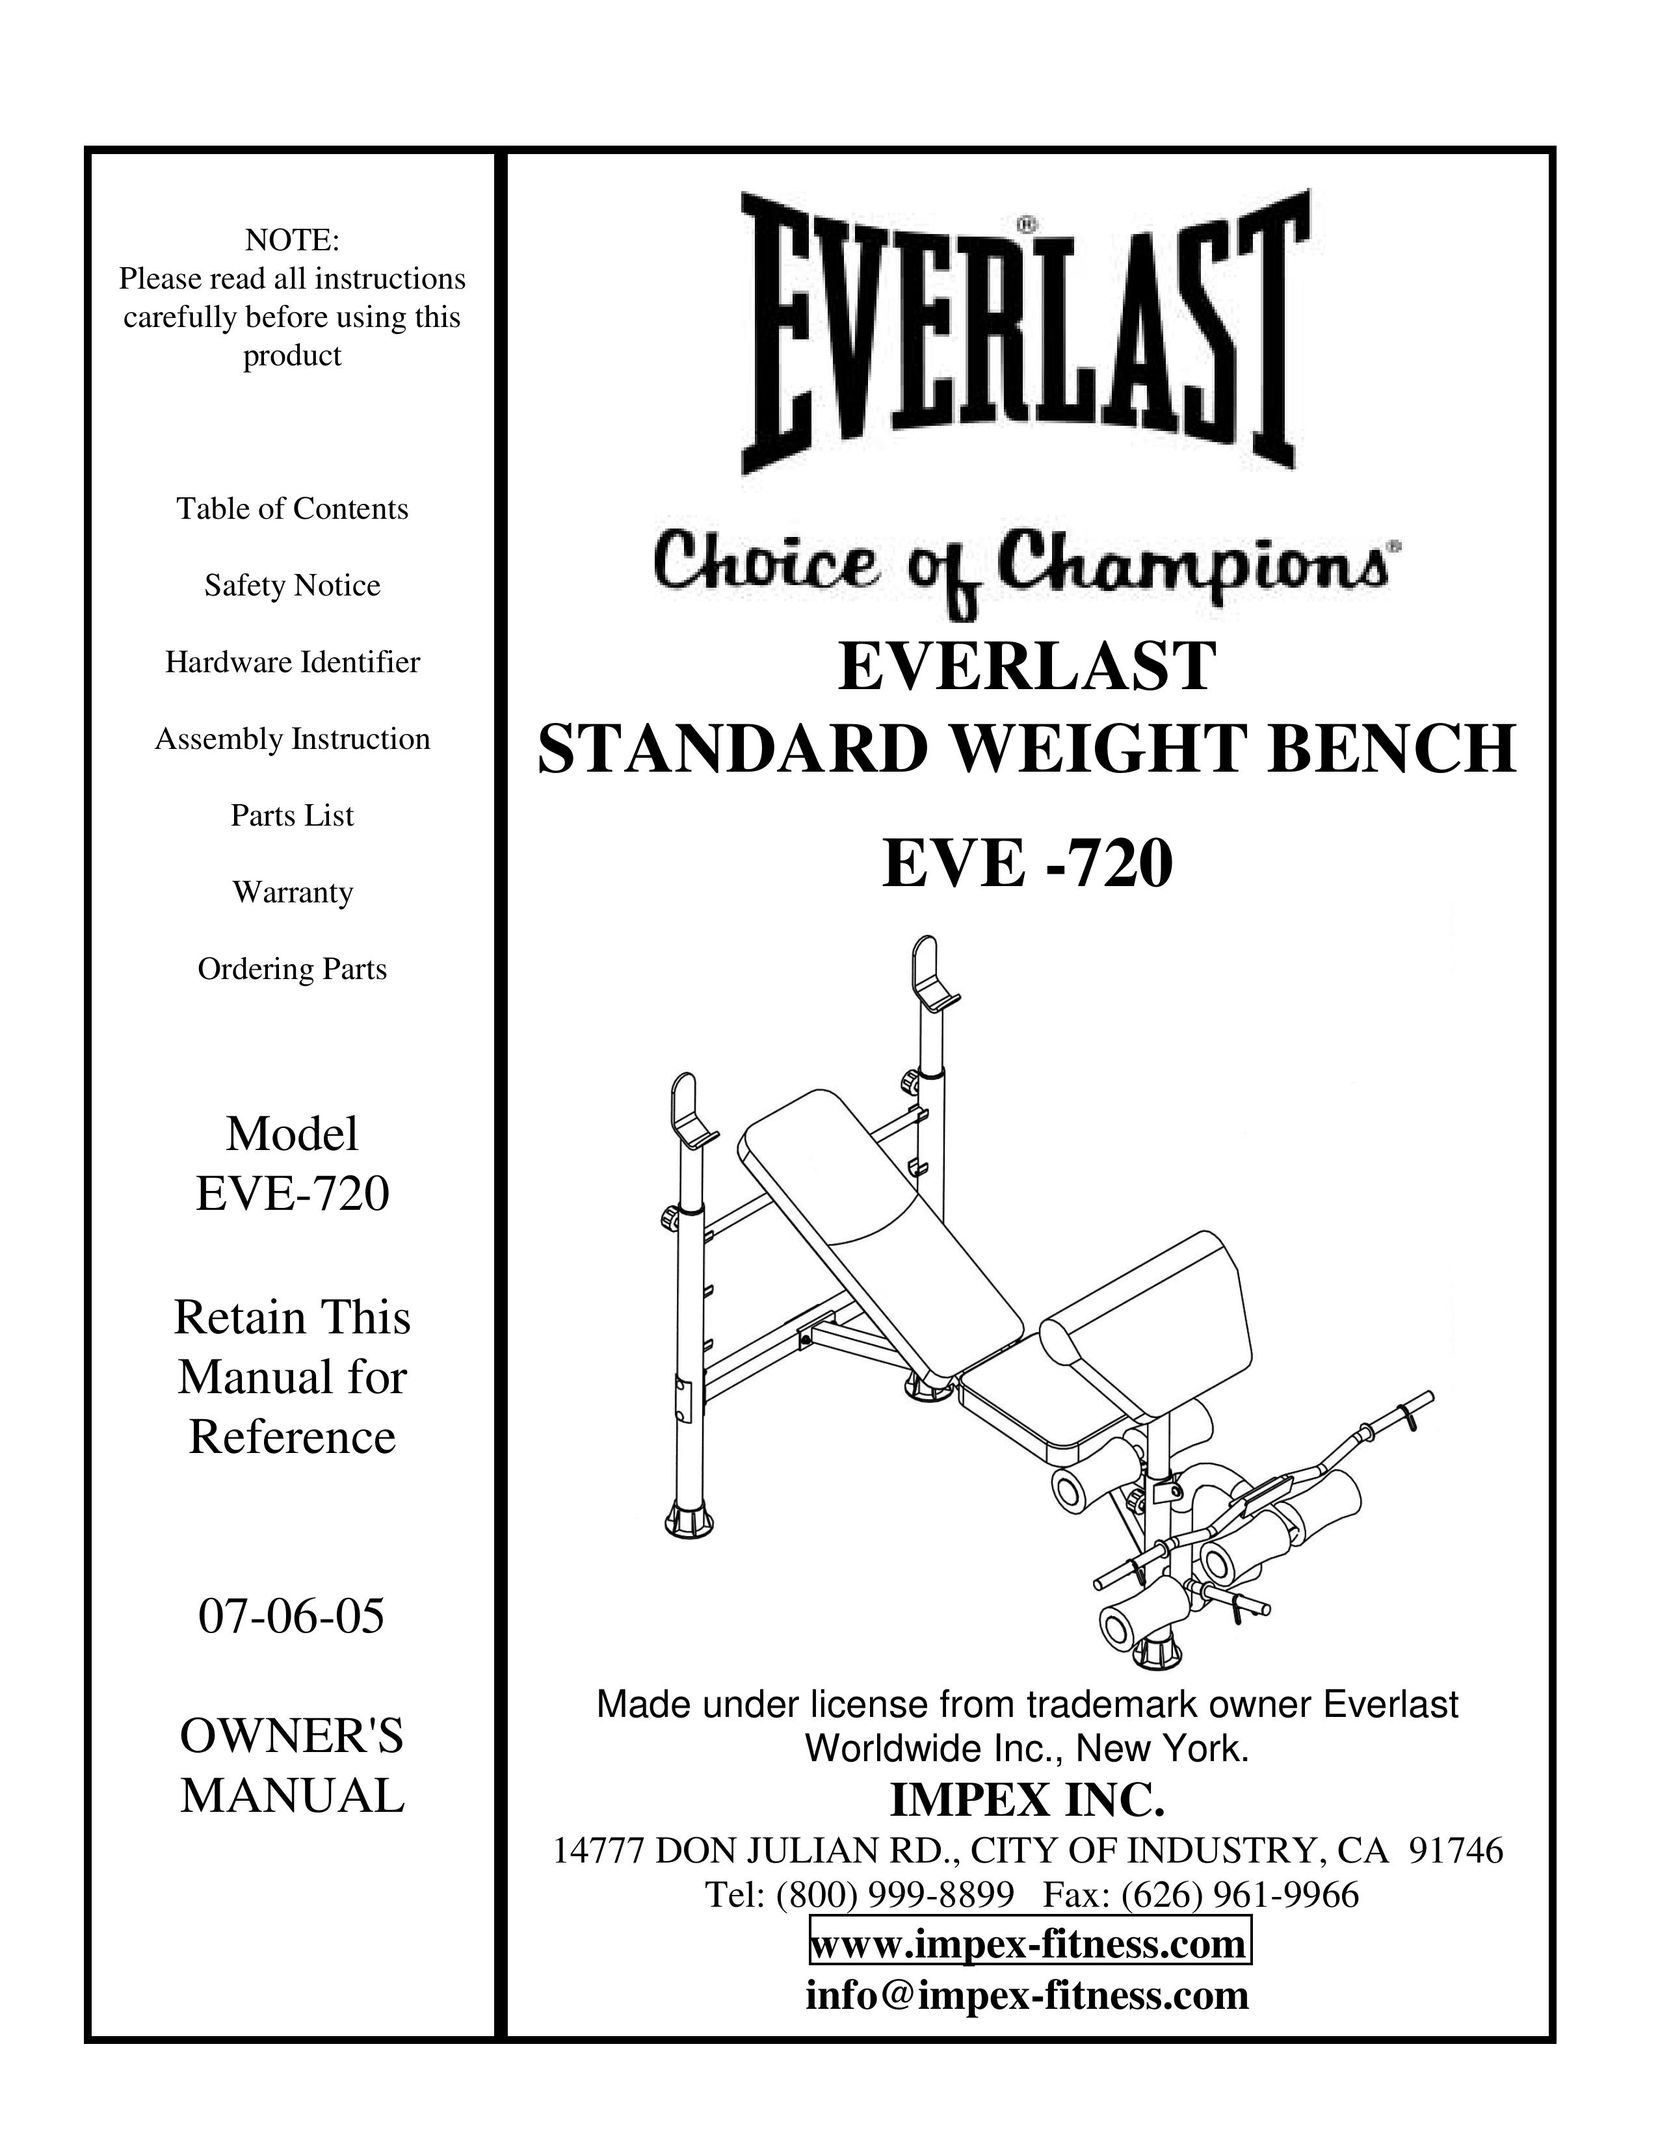 Impex EVE-720 Home Gym User Manual